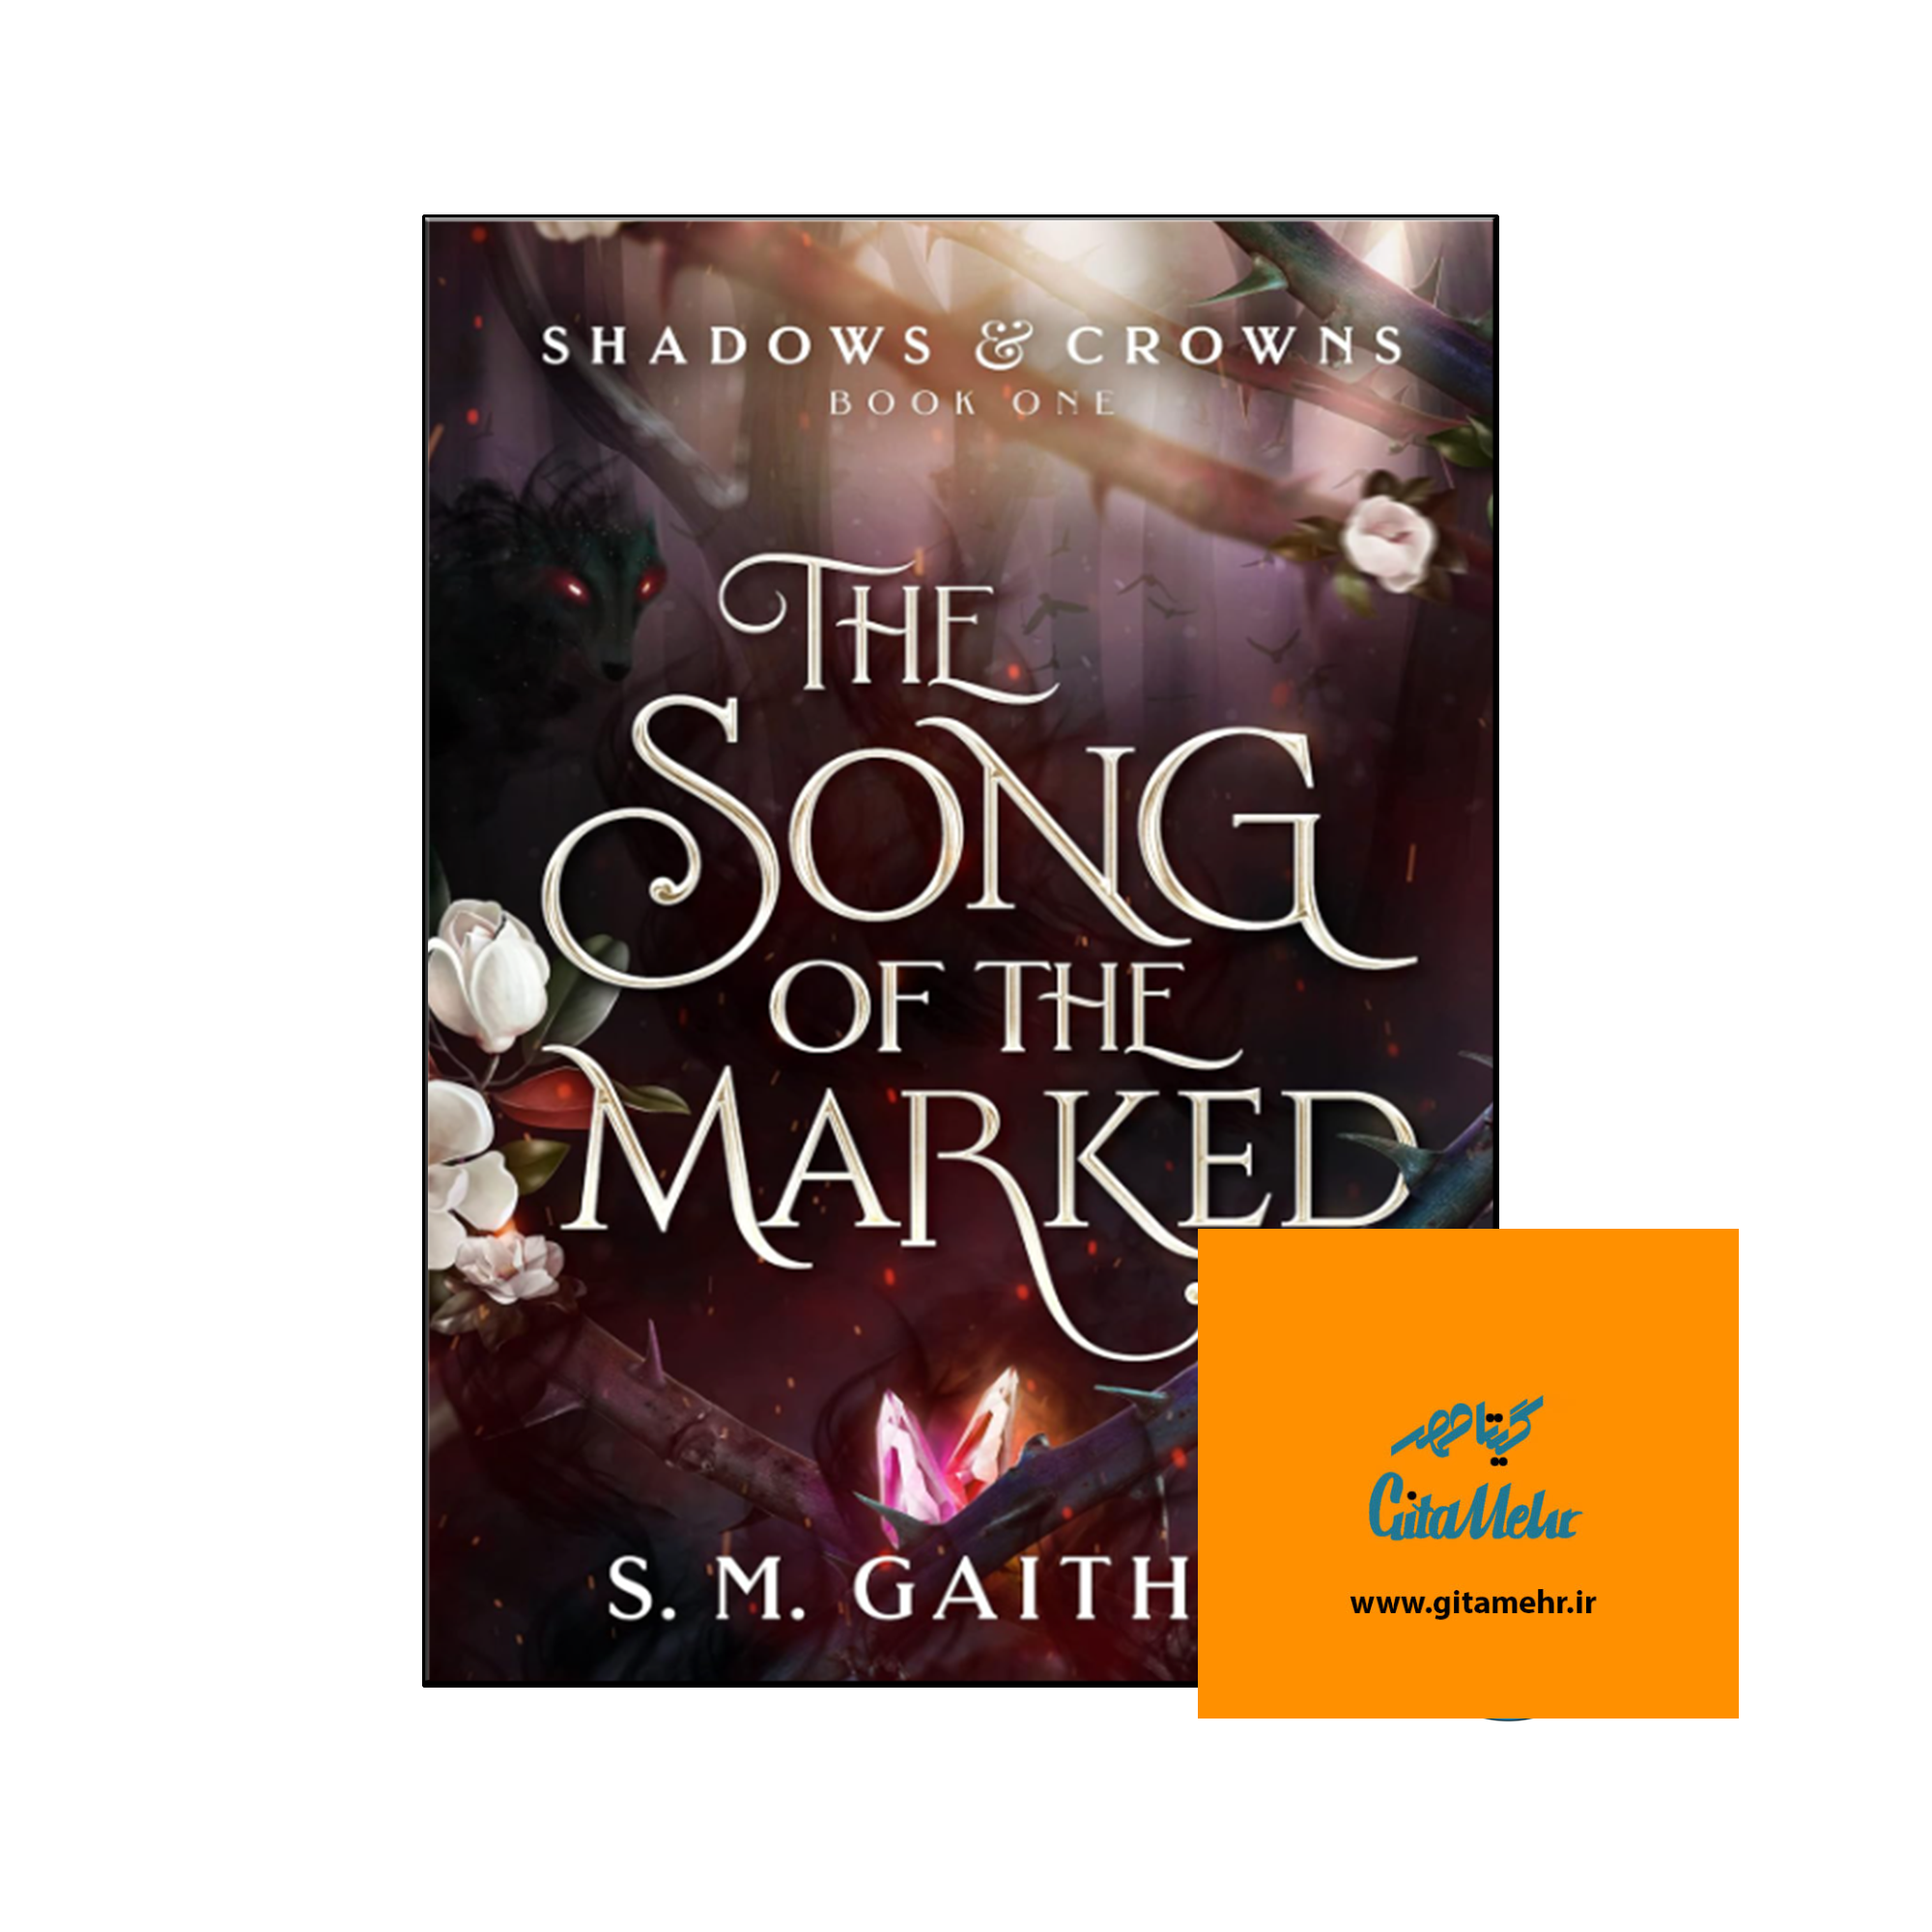 daa9d8aad8a7d8a8 the song of the marked shadows and crowns book 1 d8b1d985d8a7d986 d8a2d987d986daaf d8b9d984d8a7d985d8aa daafd8b0d8a7d8b1db8c d8b4 65ec964c5ee2c